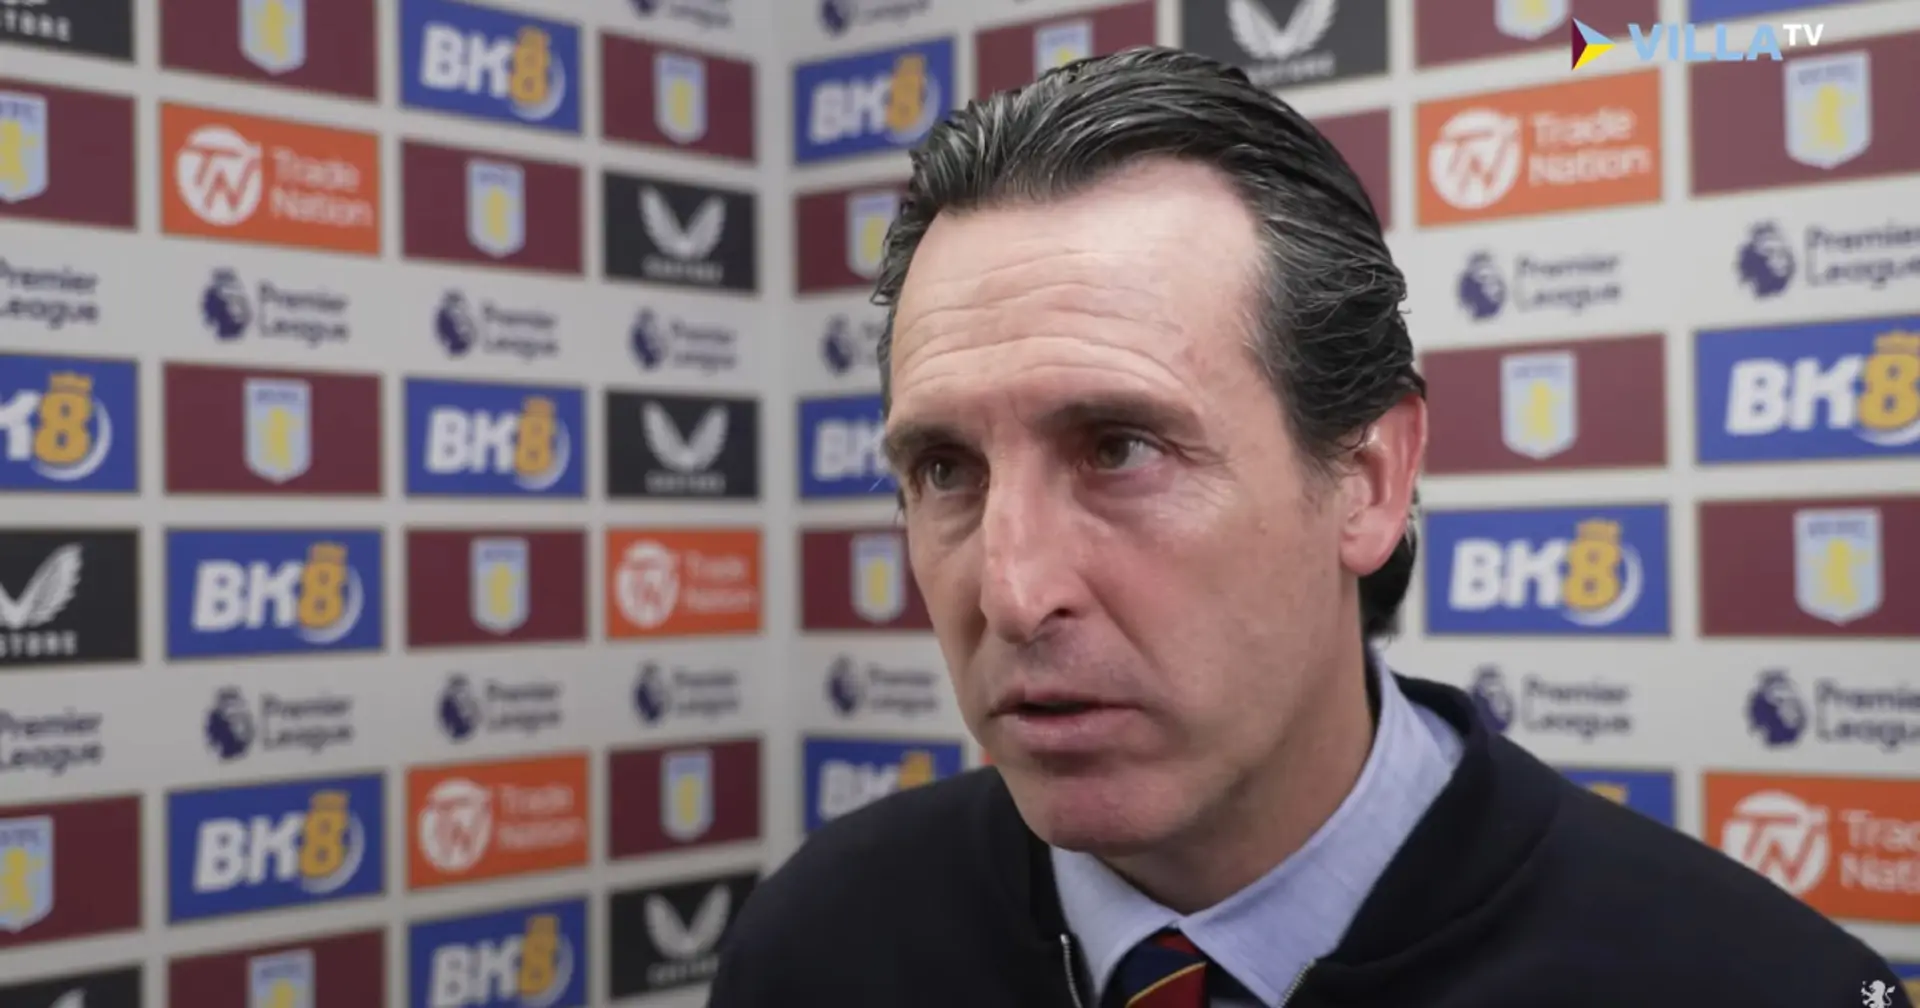 'Man United are top 4 contenders': Unai Emery starts his mindgames ahead of Old Trafford visit